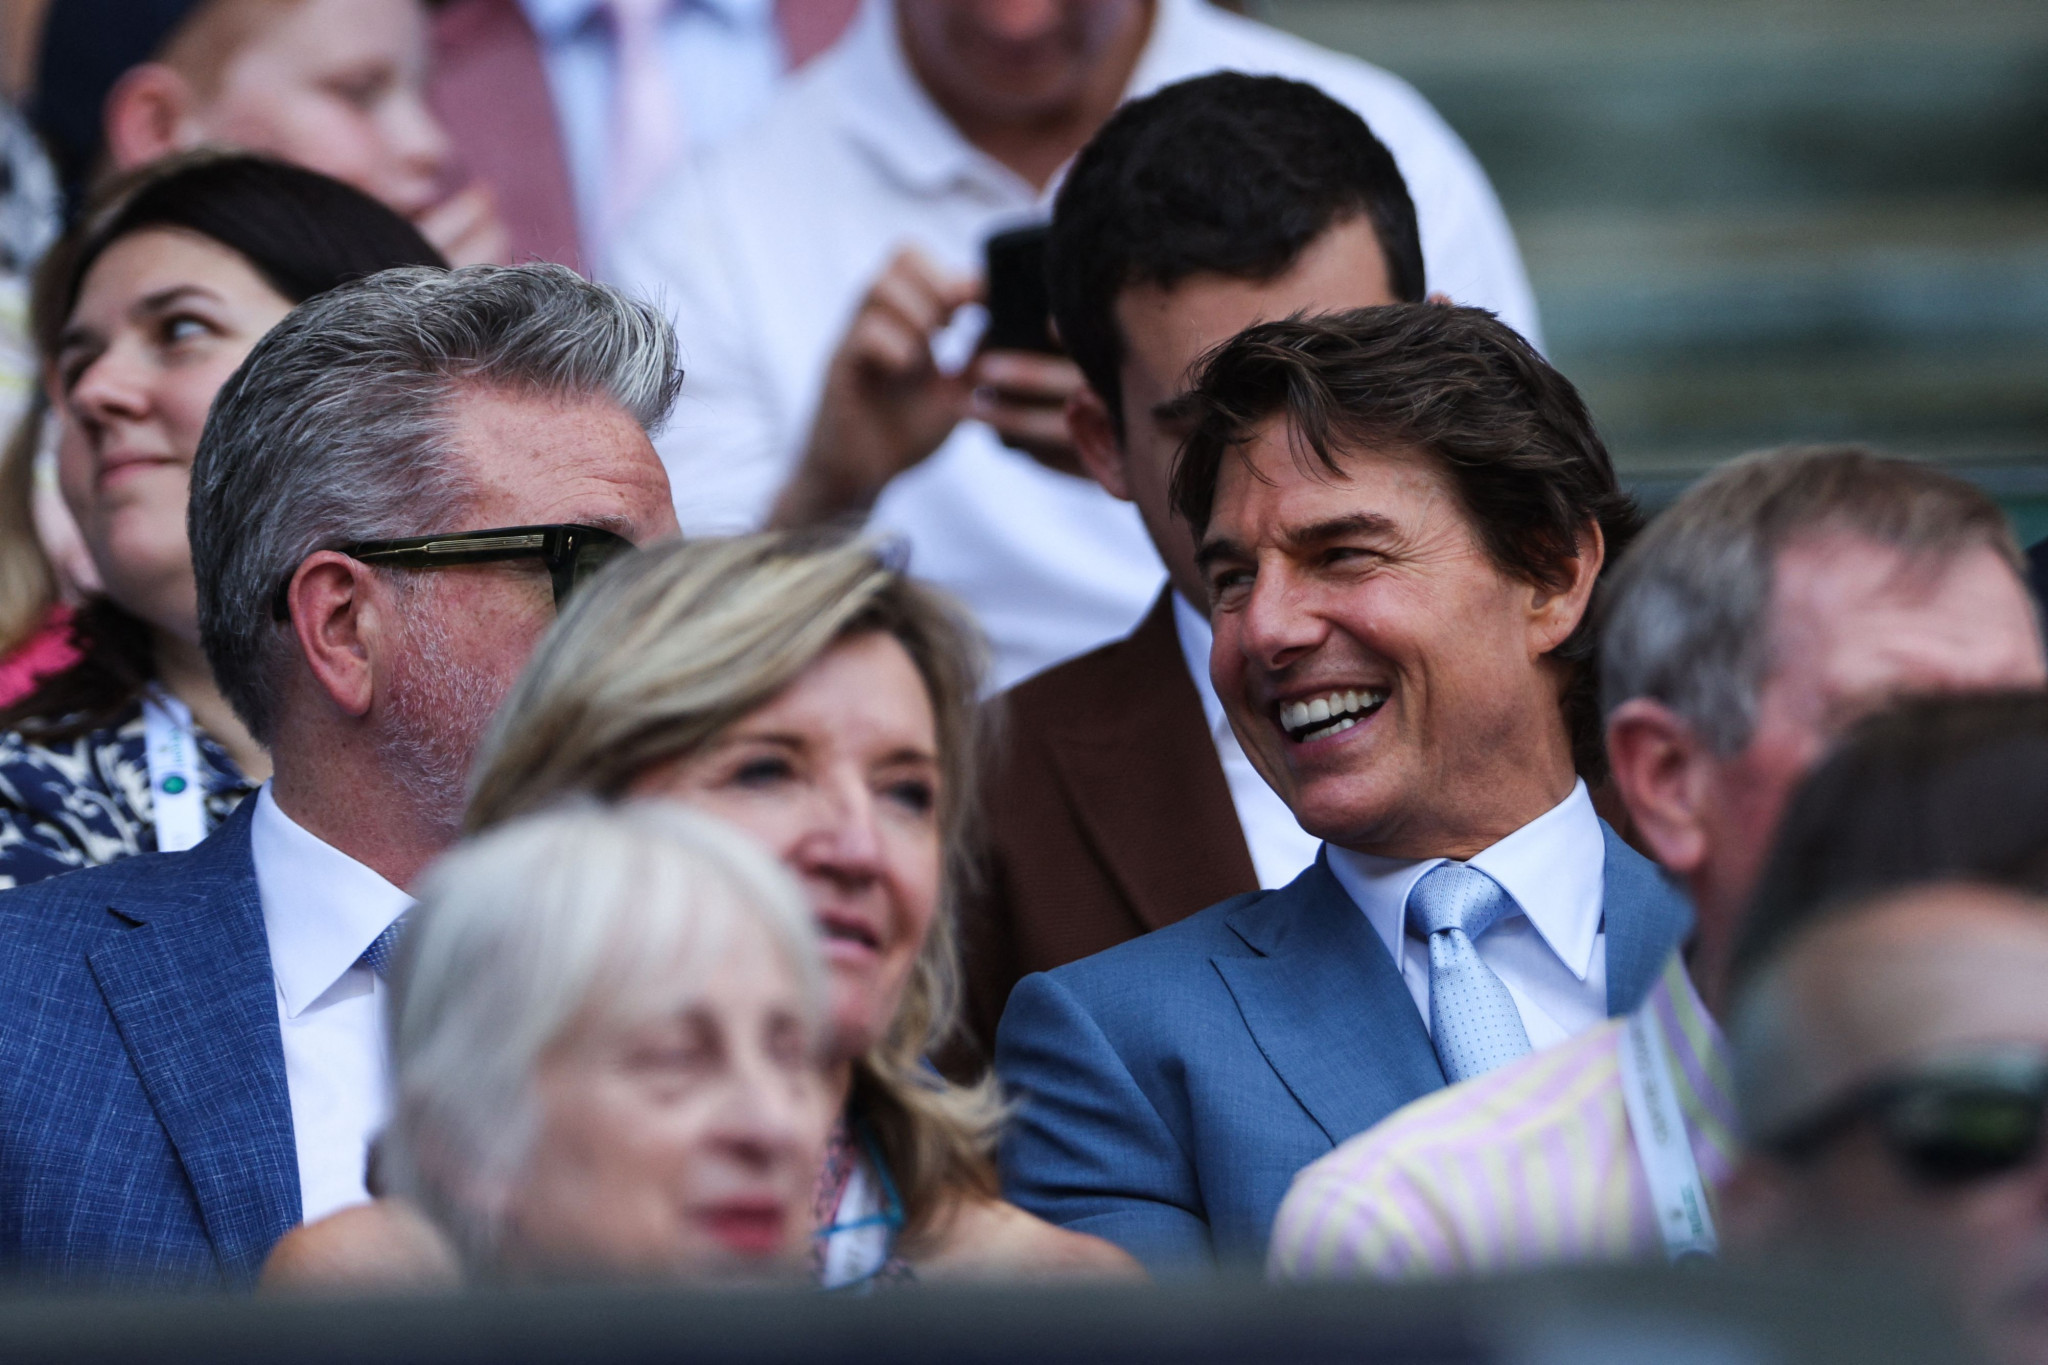 Actor Tom Cruise, right, was pictured in the crowd at the men's singles final ©Getty Images